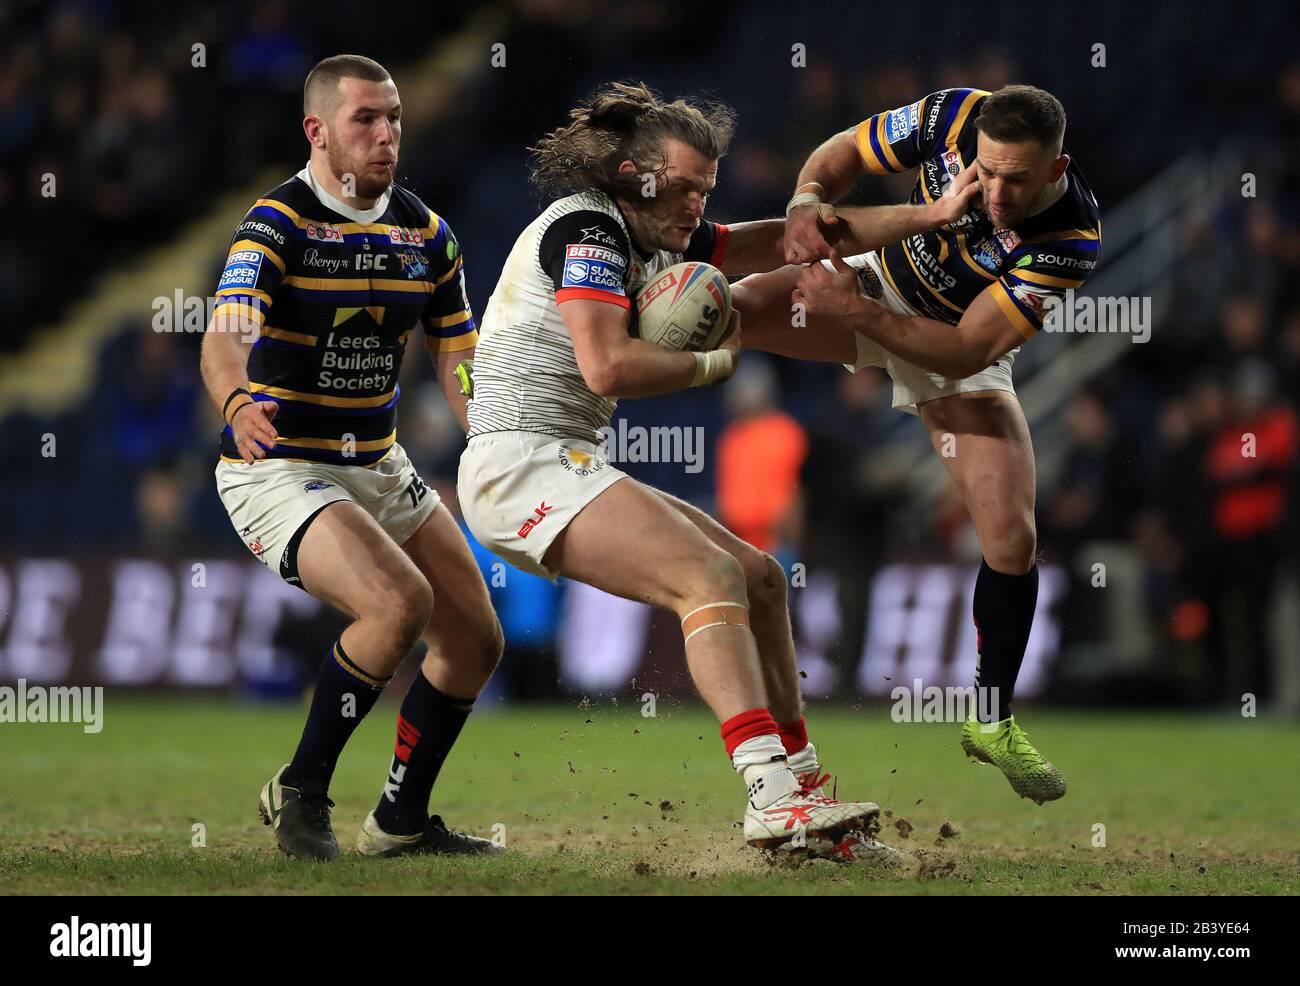 Leeds Rhinos' Luke Gale is handed off by Toronto Wolfpack's Liam Kay during the Betfred Super League match at Emerald Headingley Stadium, Leeds. Stock Photo